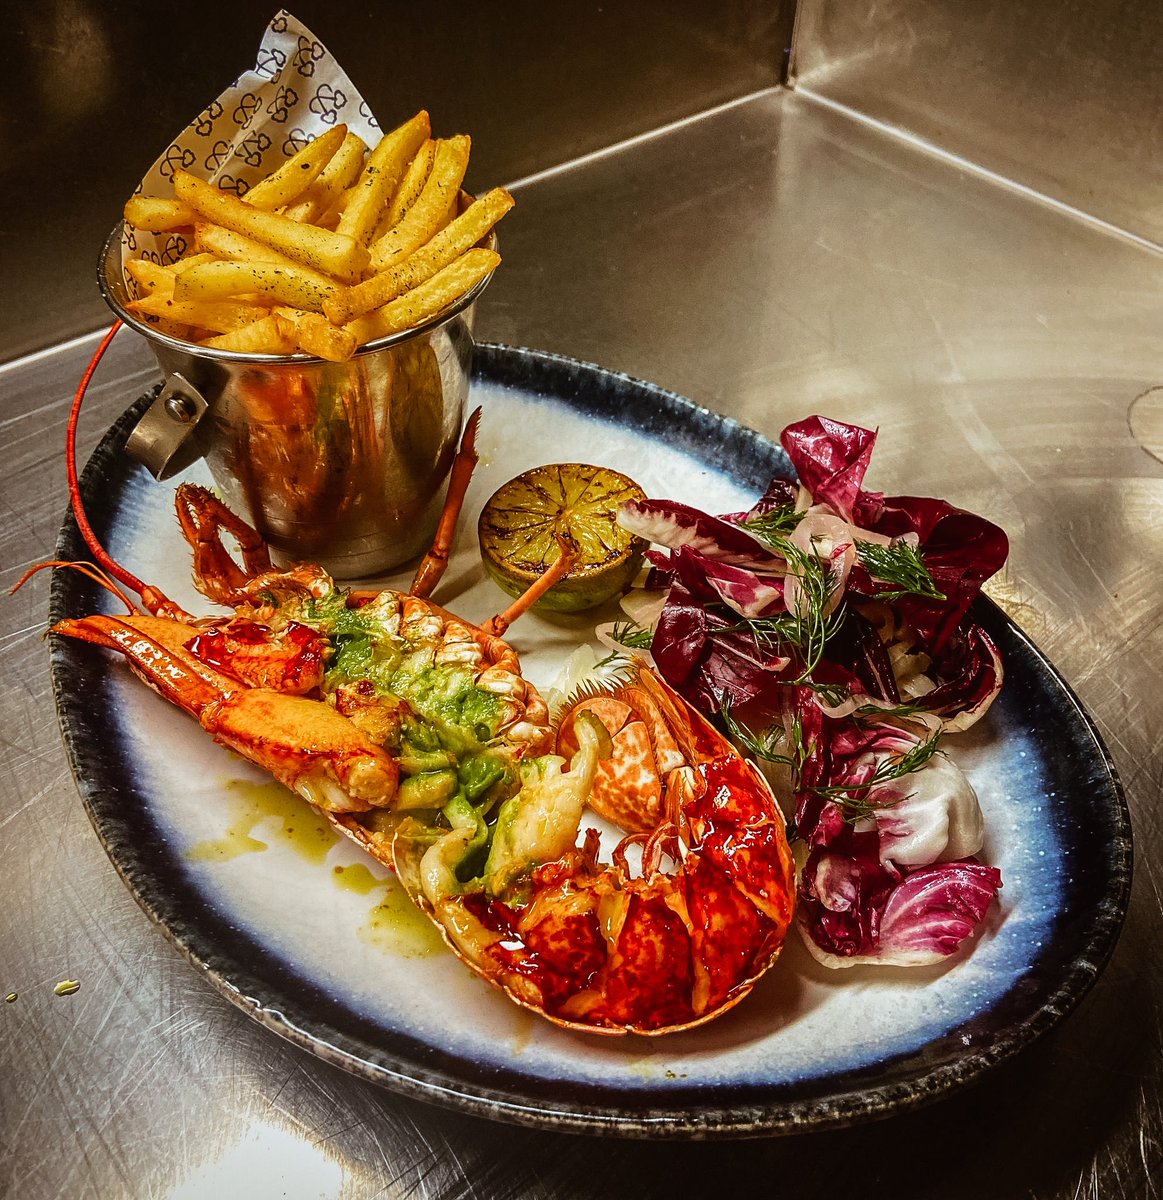 Well shell-o there… 🦞 Tickling our tastebuds and making miso hungry today is this luscious lobster dish from the clawsome Chef, David Hall and crew. Grilled lobster with miso garlic butter, seaweed fries, raddichio, dill and fennel salad. #shellyeah #offthehook #fishmoments